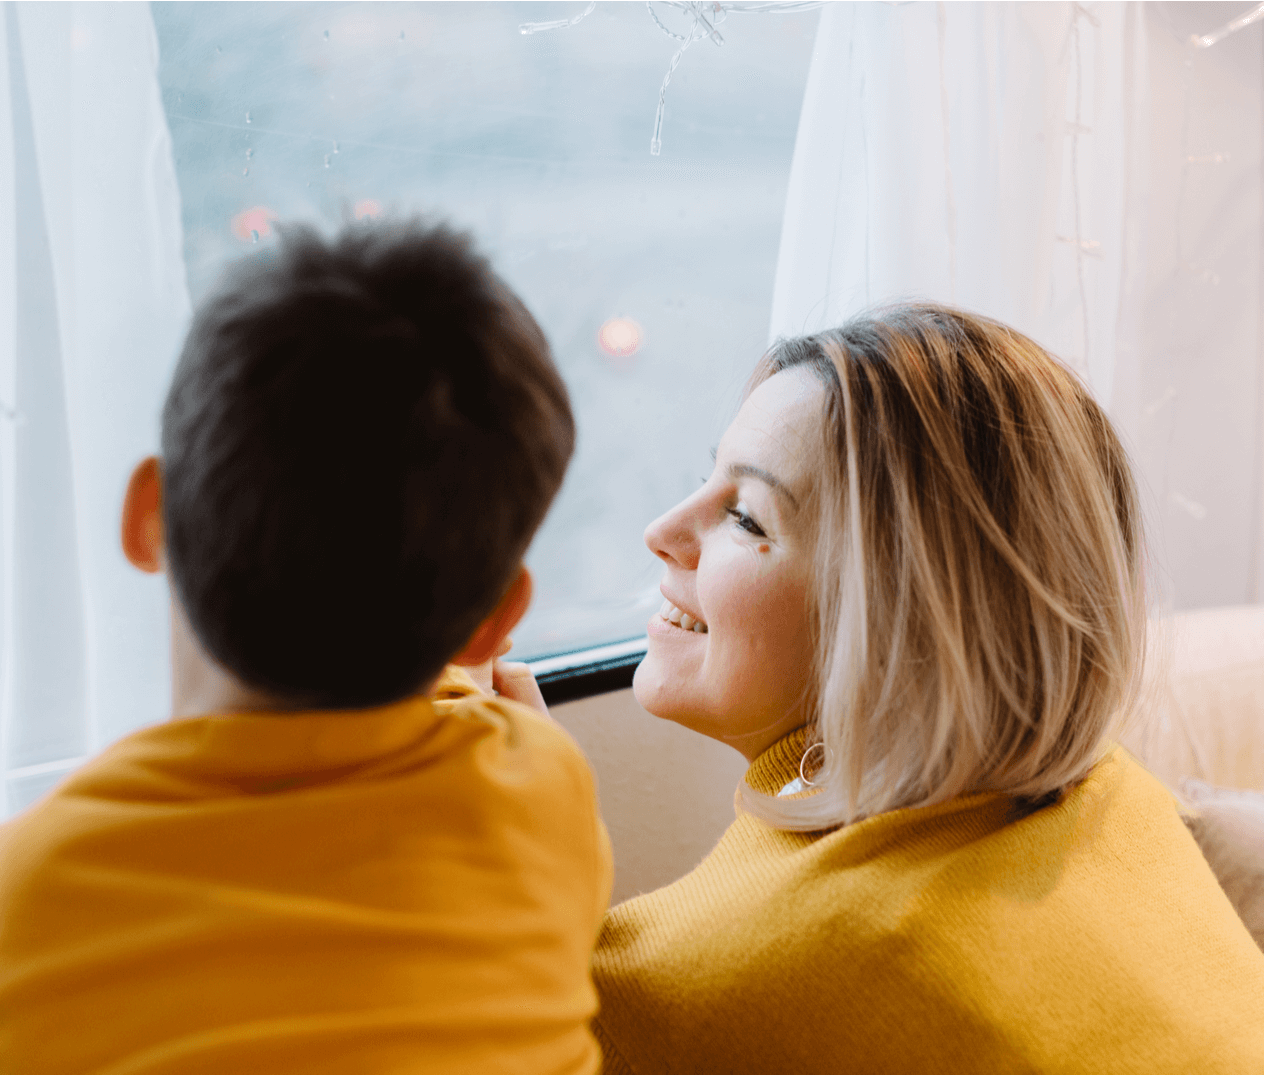 Caucasian woman smiling while looking out a window with her young son.